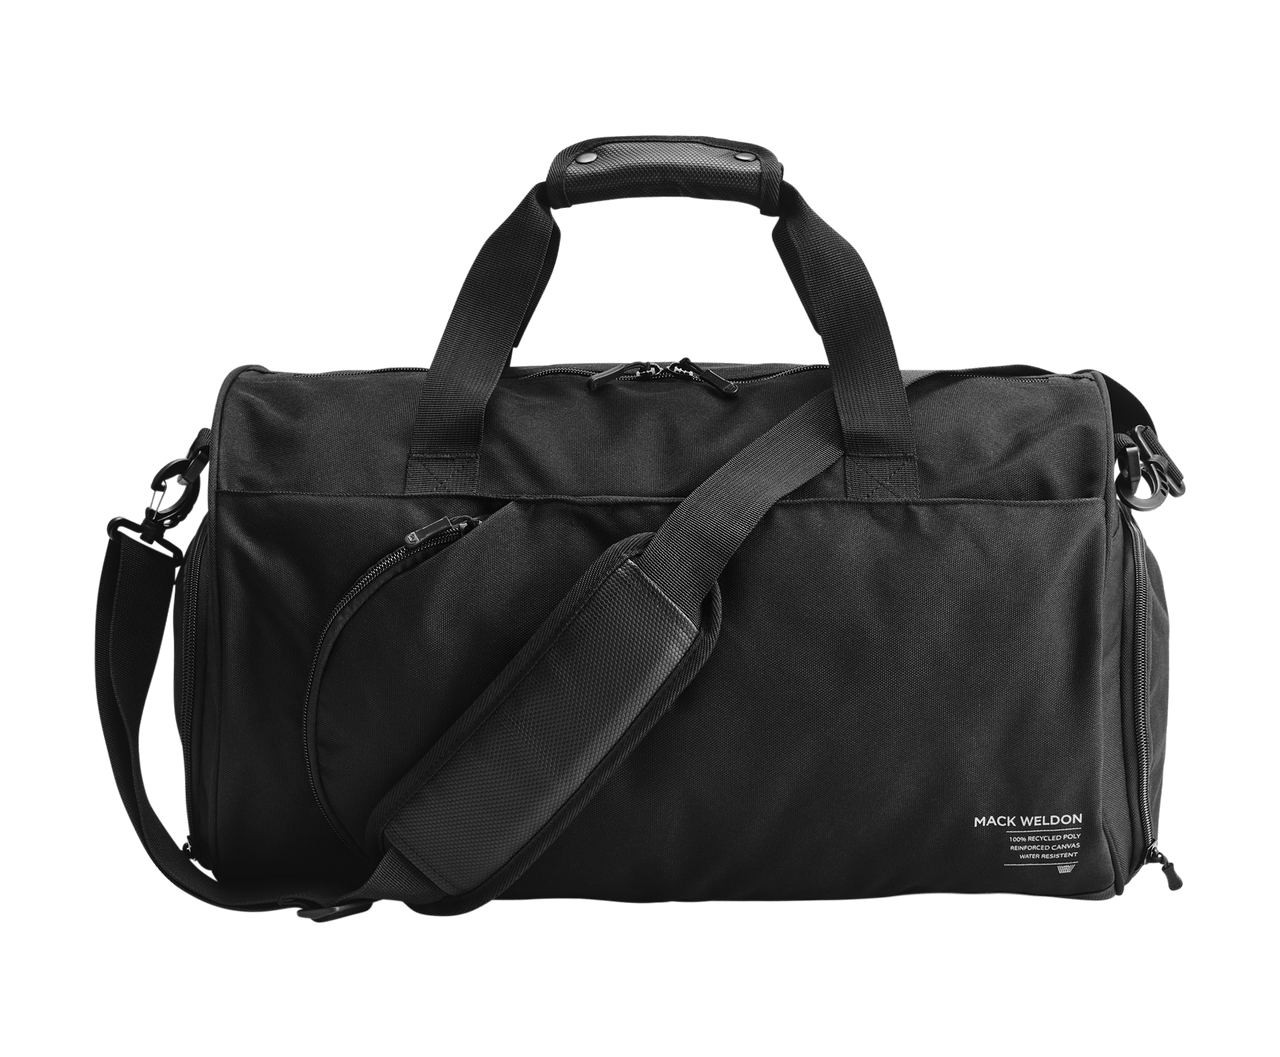 The 10 Best Mens Travel Bags for Short Trips